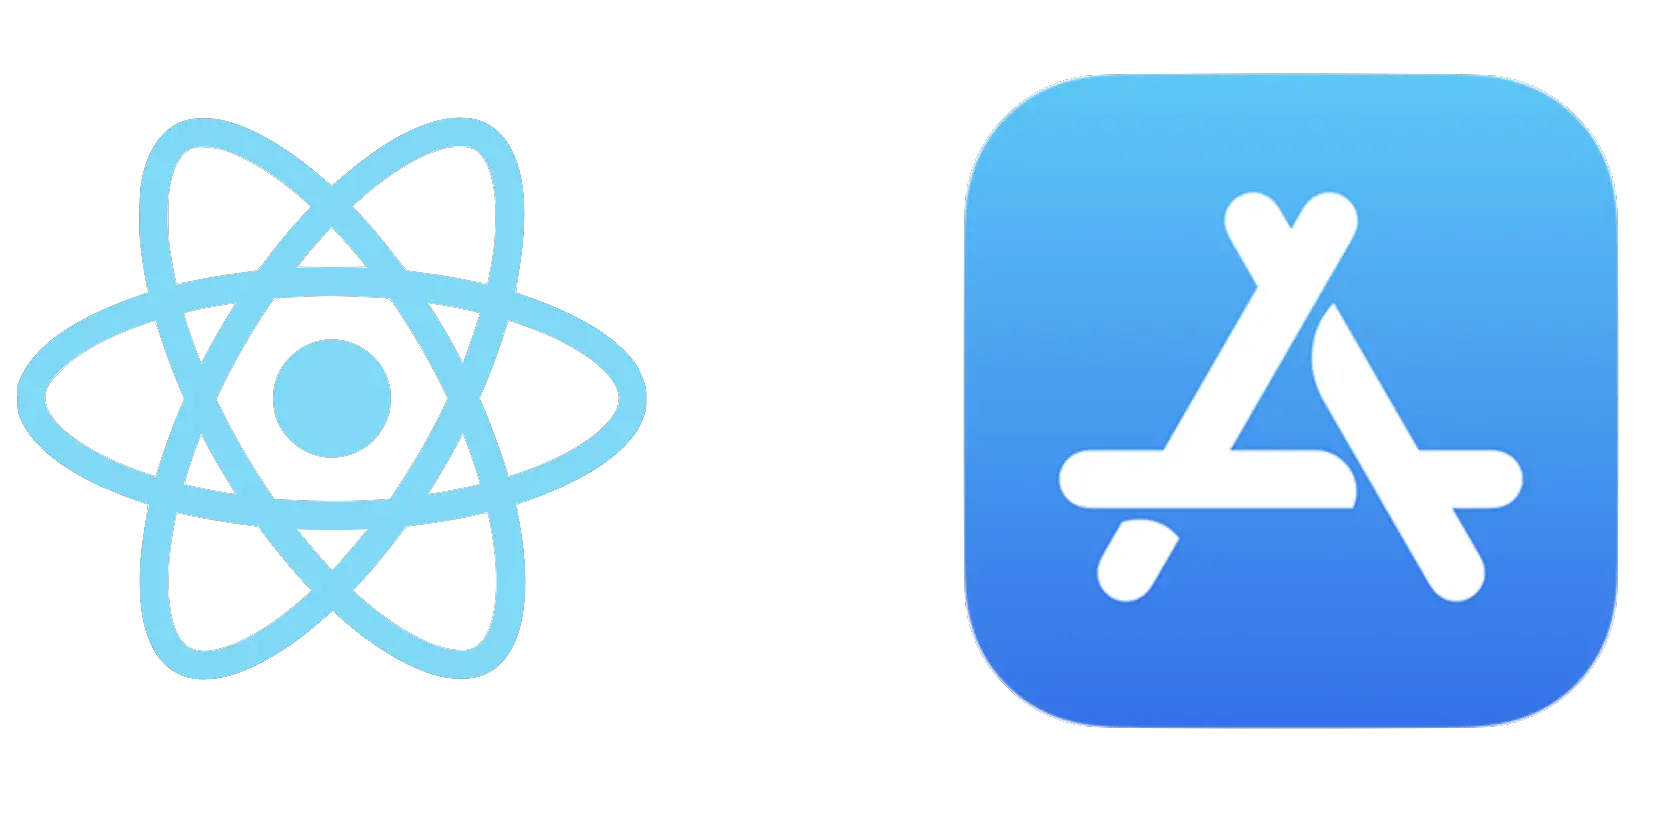 How to Open App Store in React Native